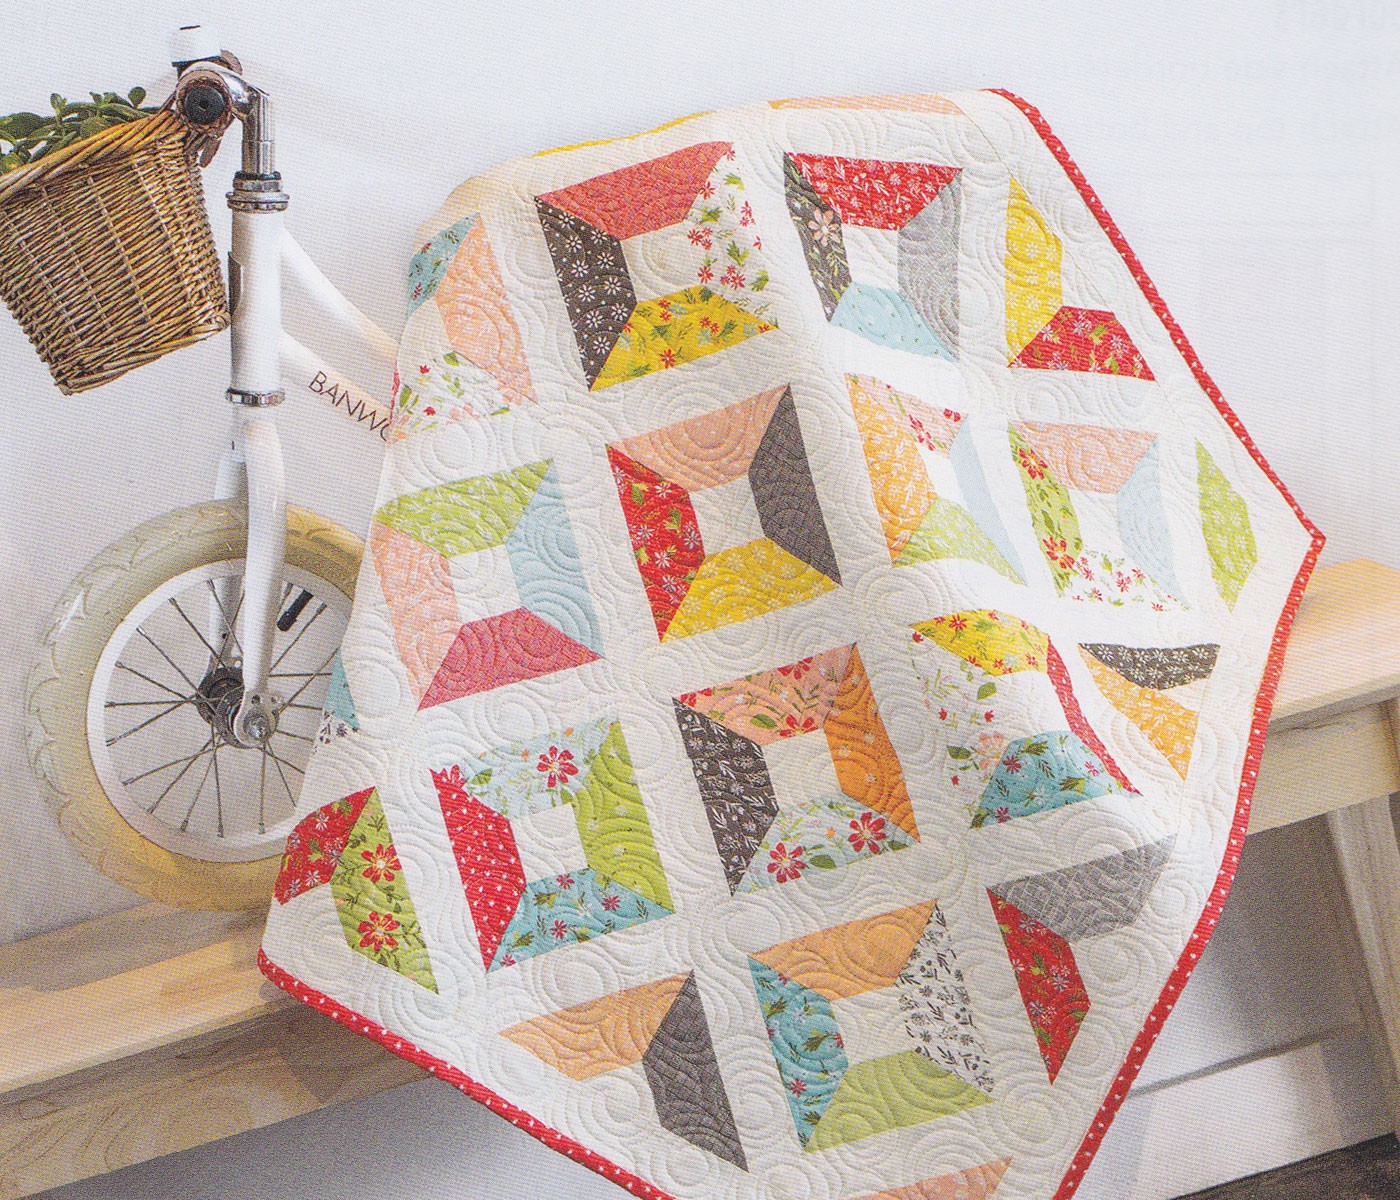 Charming Baby Quilts Book | Melissa Corry #ISE-937